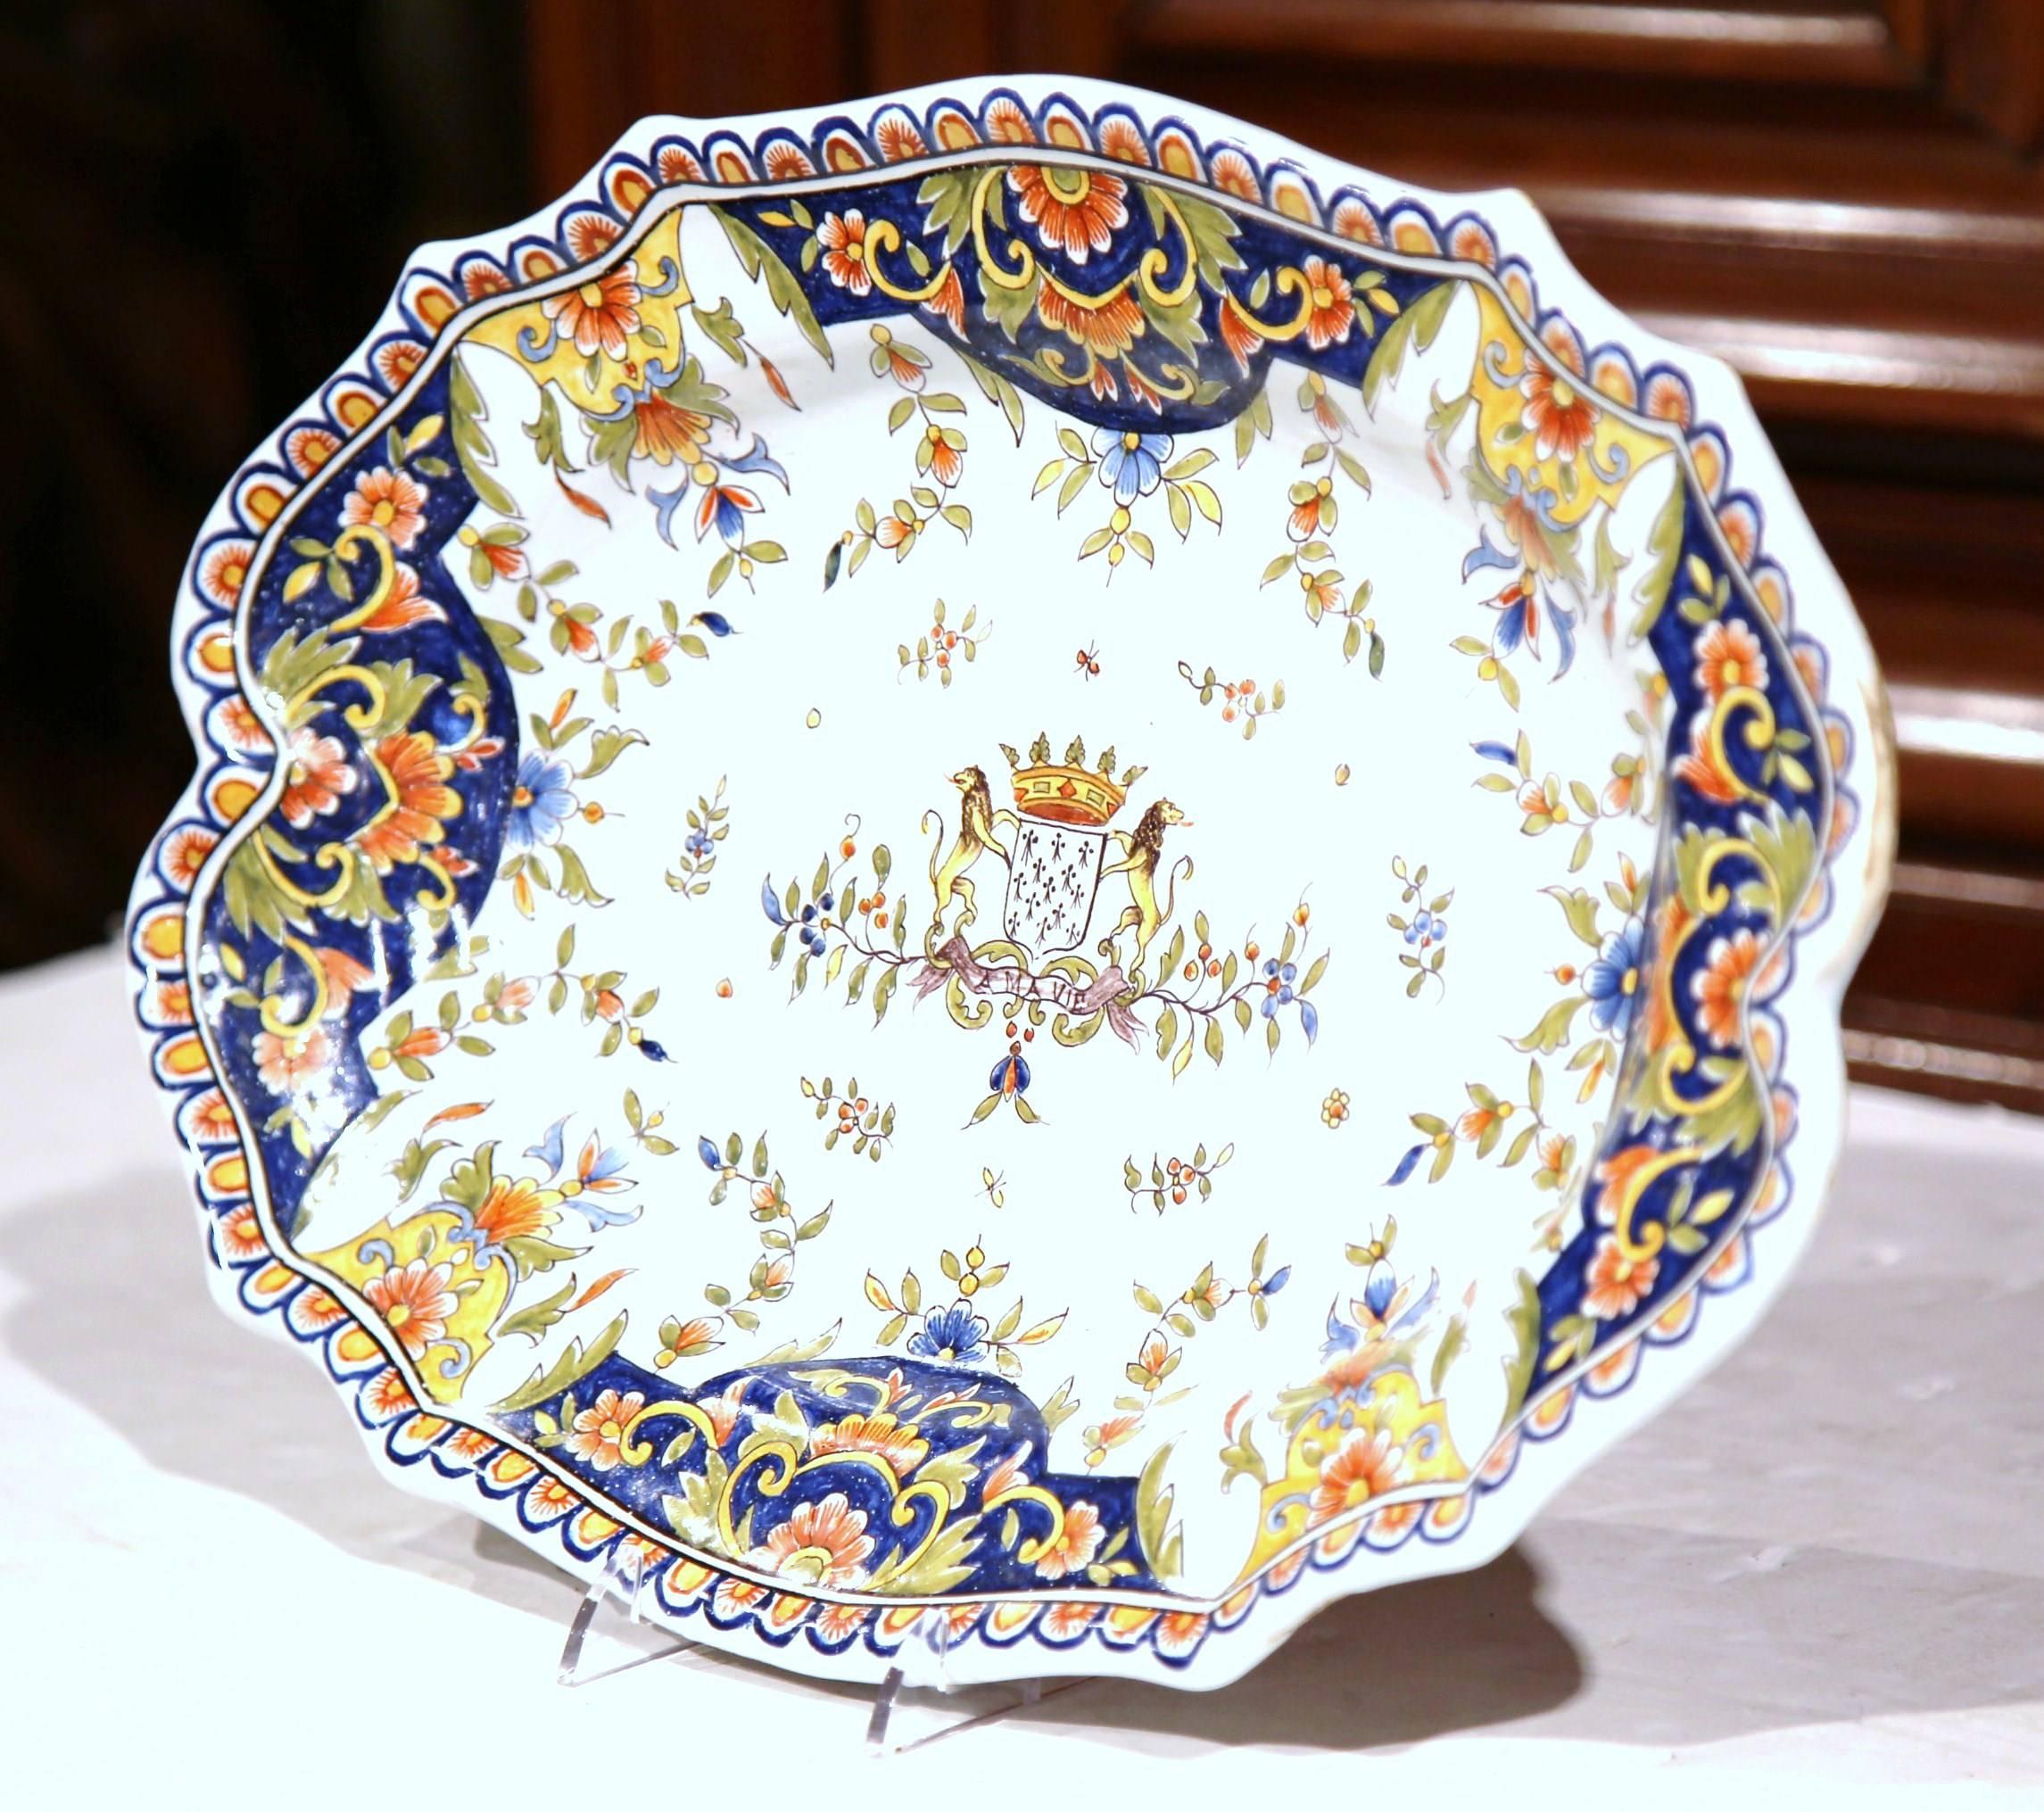 This beautiful antique wall hanging platter was crafted in Rouen, northern France, circa 1870. The colorful, oval dish with floral decor around the periphery, features a traditional center coat of arms with Fleurs-de-Lys and a pair of royal lions